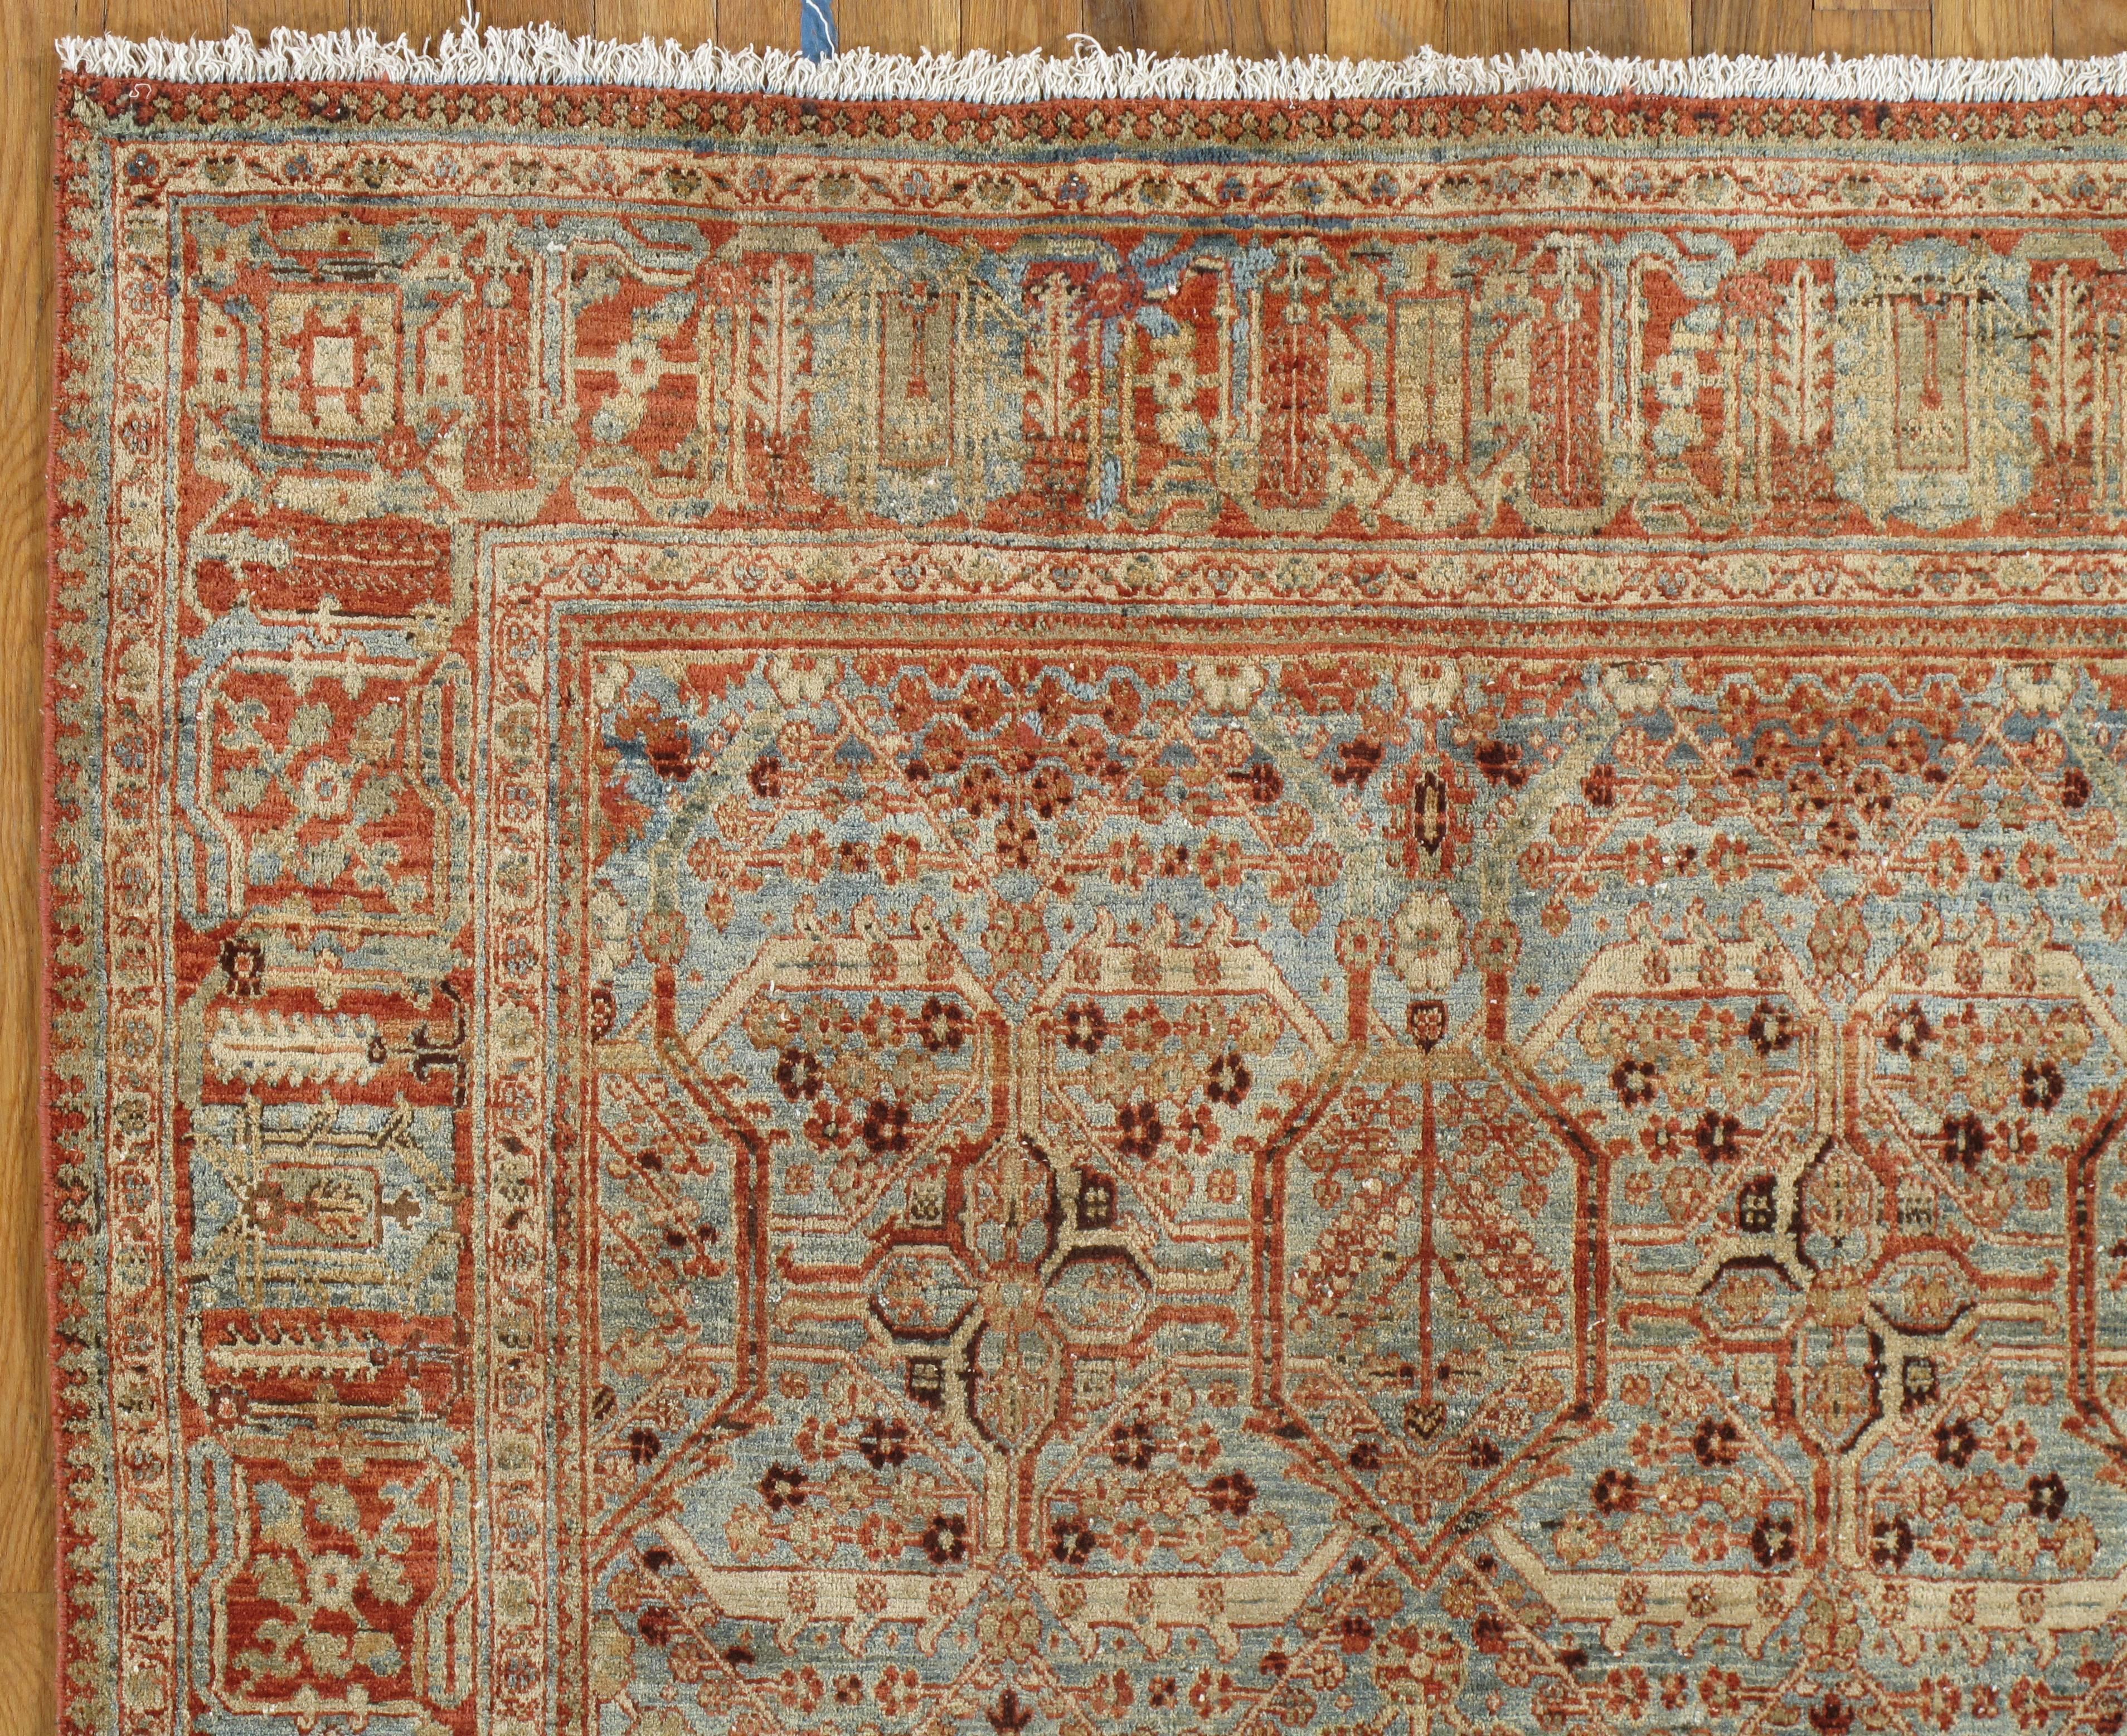 Persian Antique Tabriz Rug, Handmade Oriental Rug in Terracotta, Light Blue and Taupe